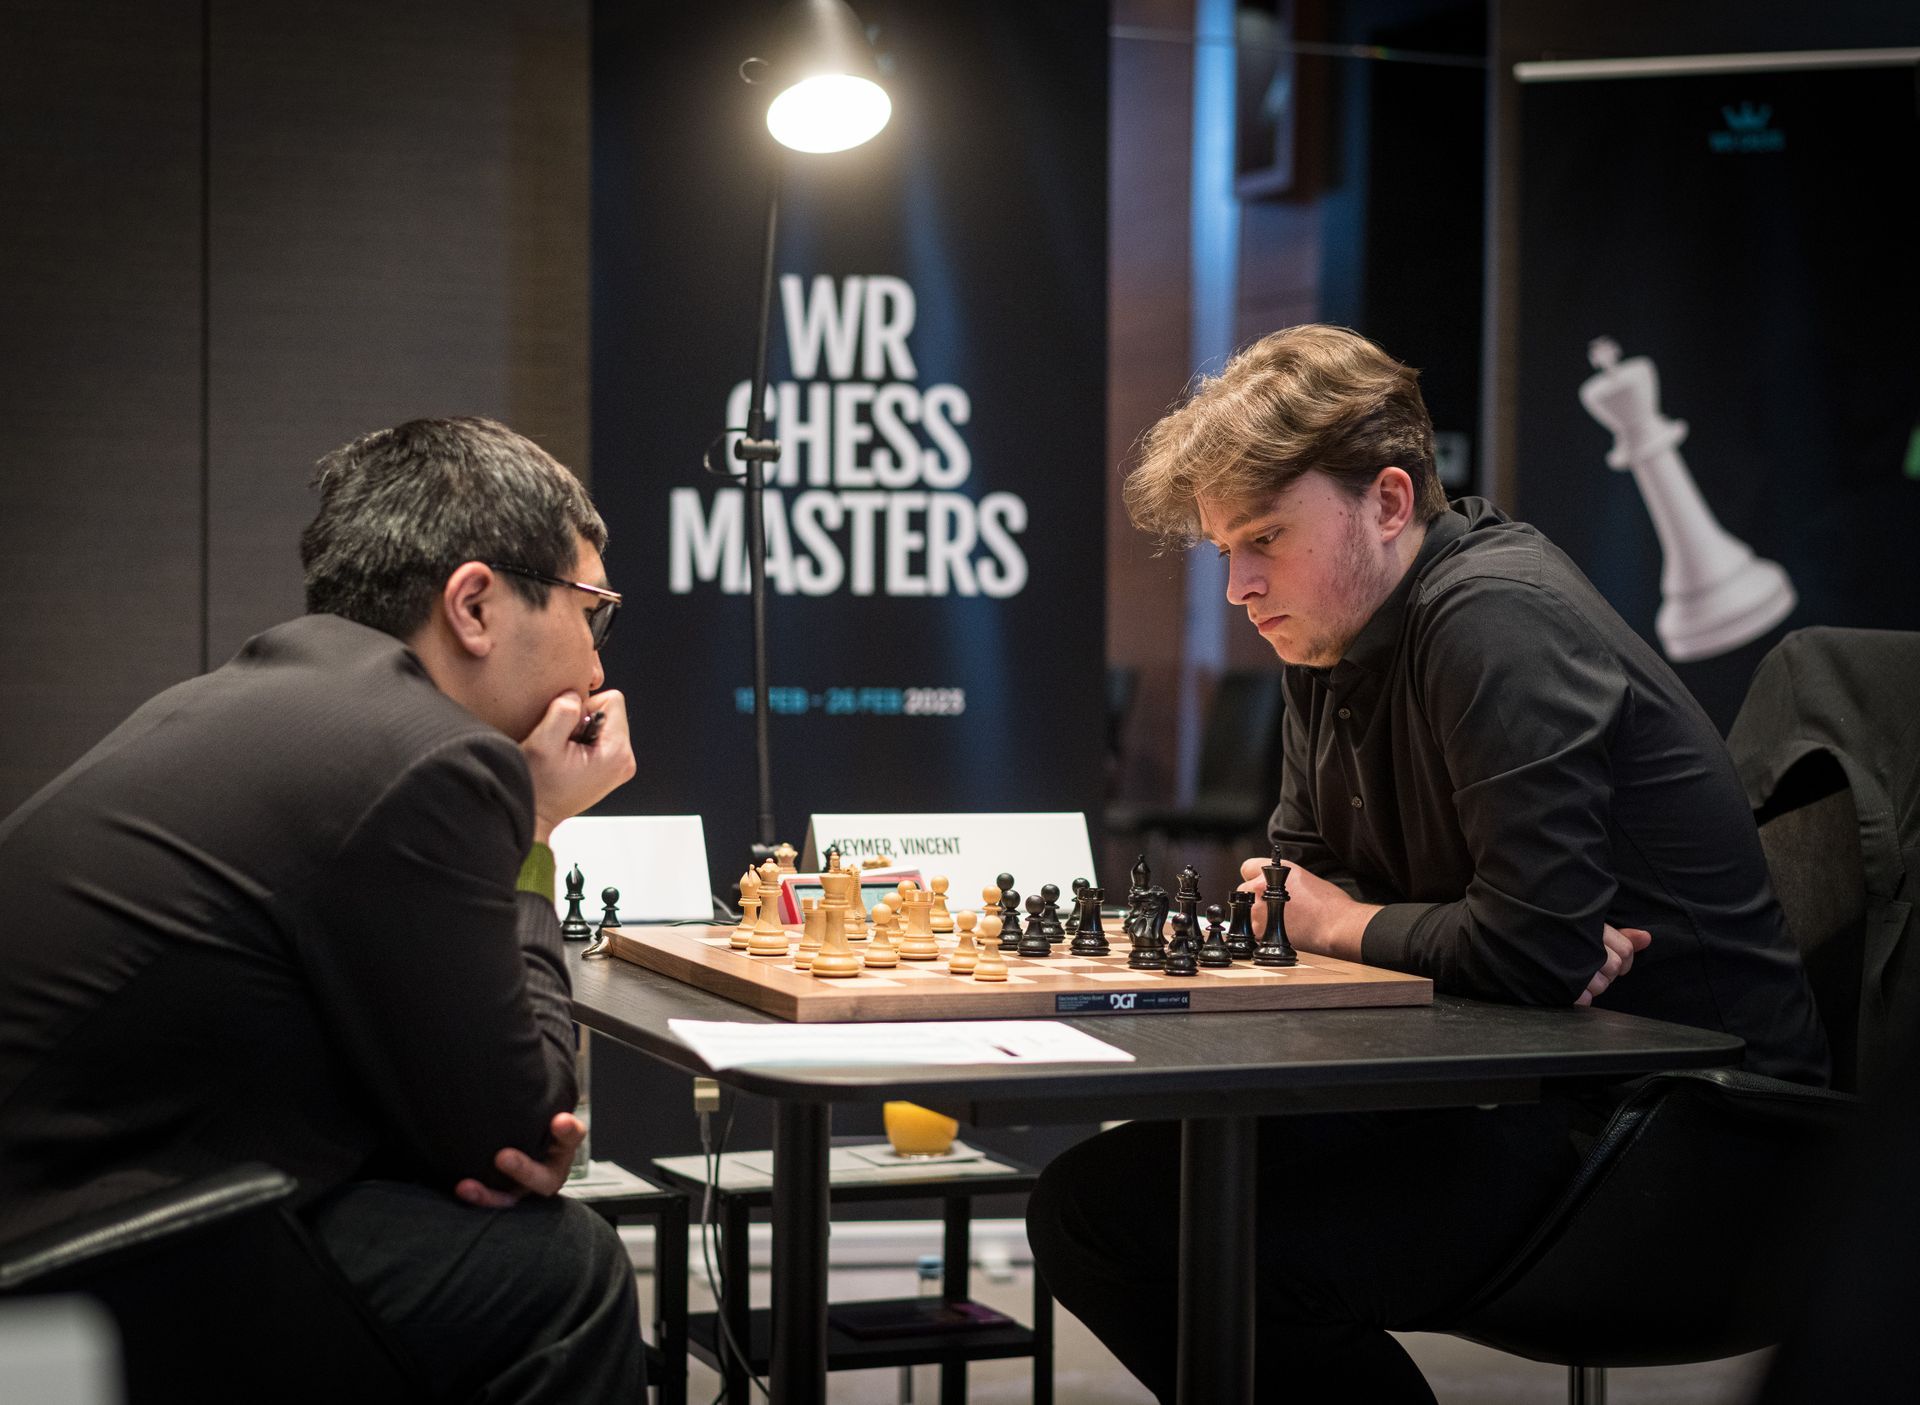 Keymer Overcomes So With Black; Aronian 'Over The Moon' After Saving Lost  Game 